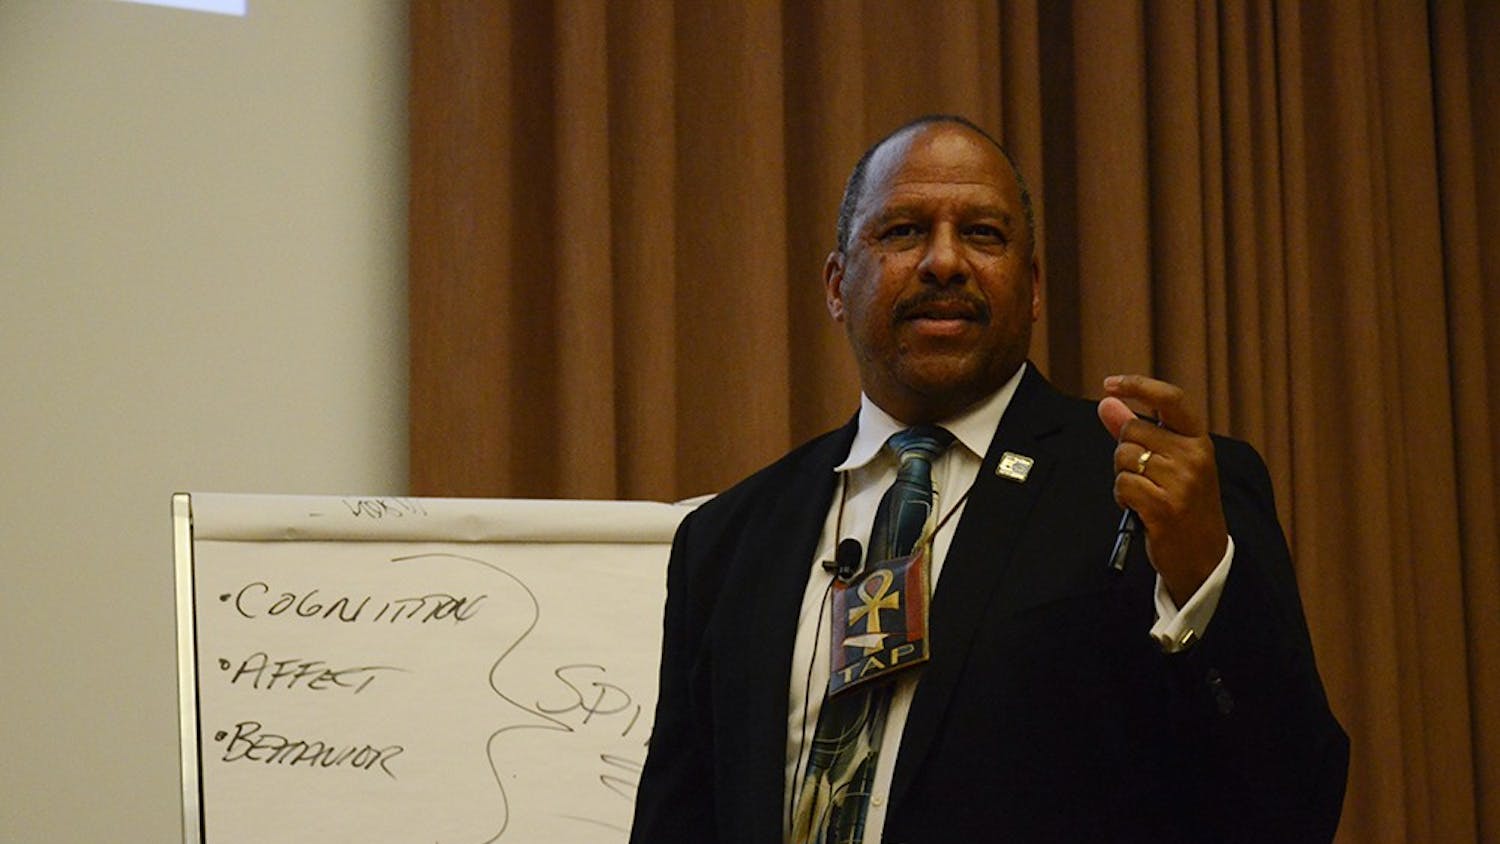 Thomas A. Parham, Ph.D., Vice Chancellor for Student Affairs at University of California, Irvine, gives a lecture titled "Historical Trauma & Mental Health in the African American Community" in the Grand Hall at the Neal Marshall Black Culture Center on Wednesday. 